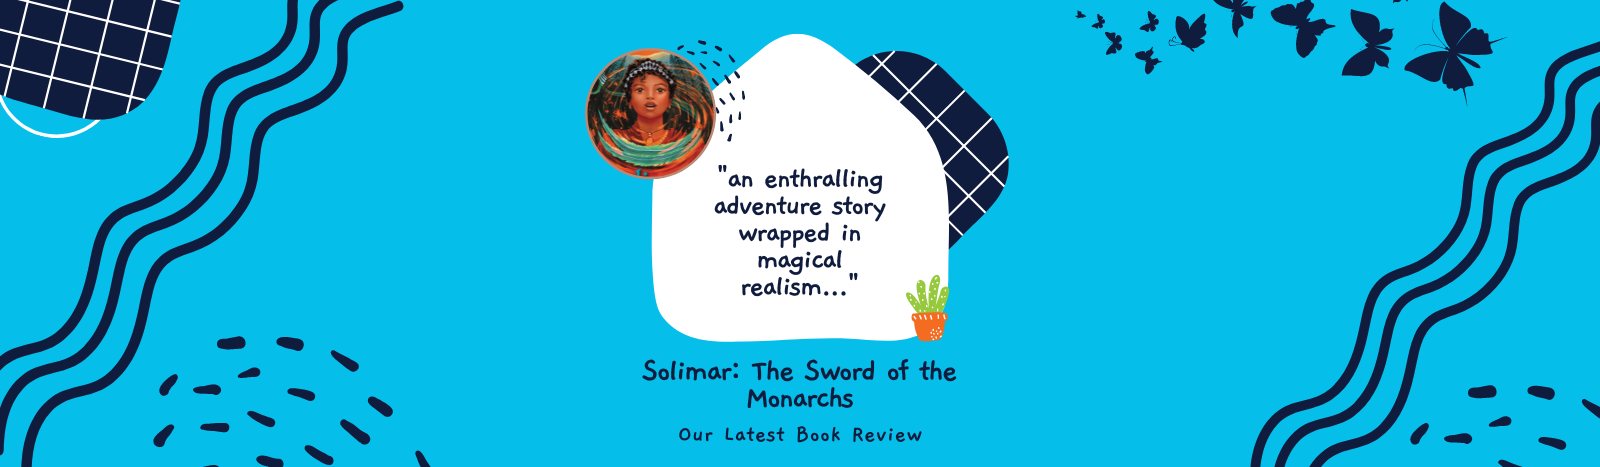 Solimar: The Sword of the Monarchs by Pam Muñoz Ryan – Book Review